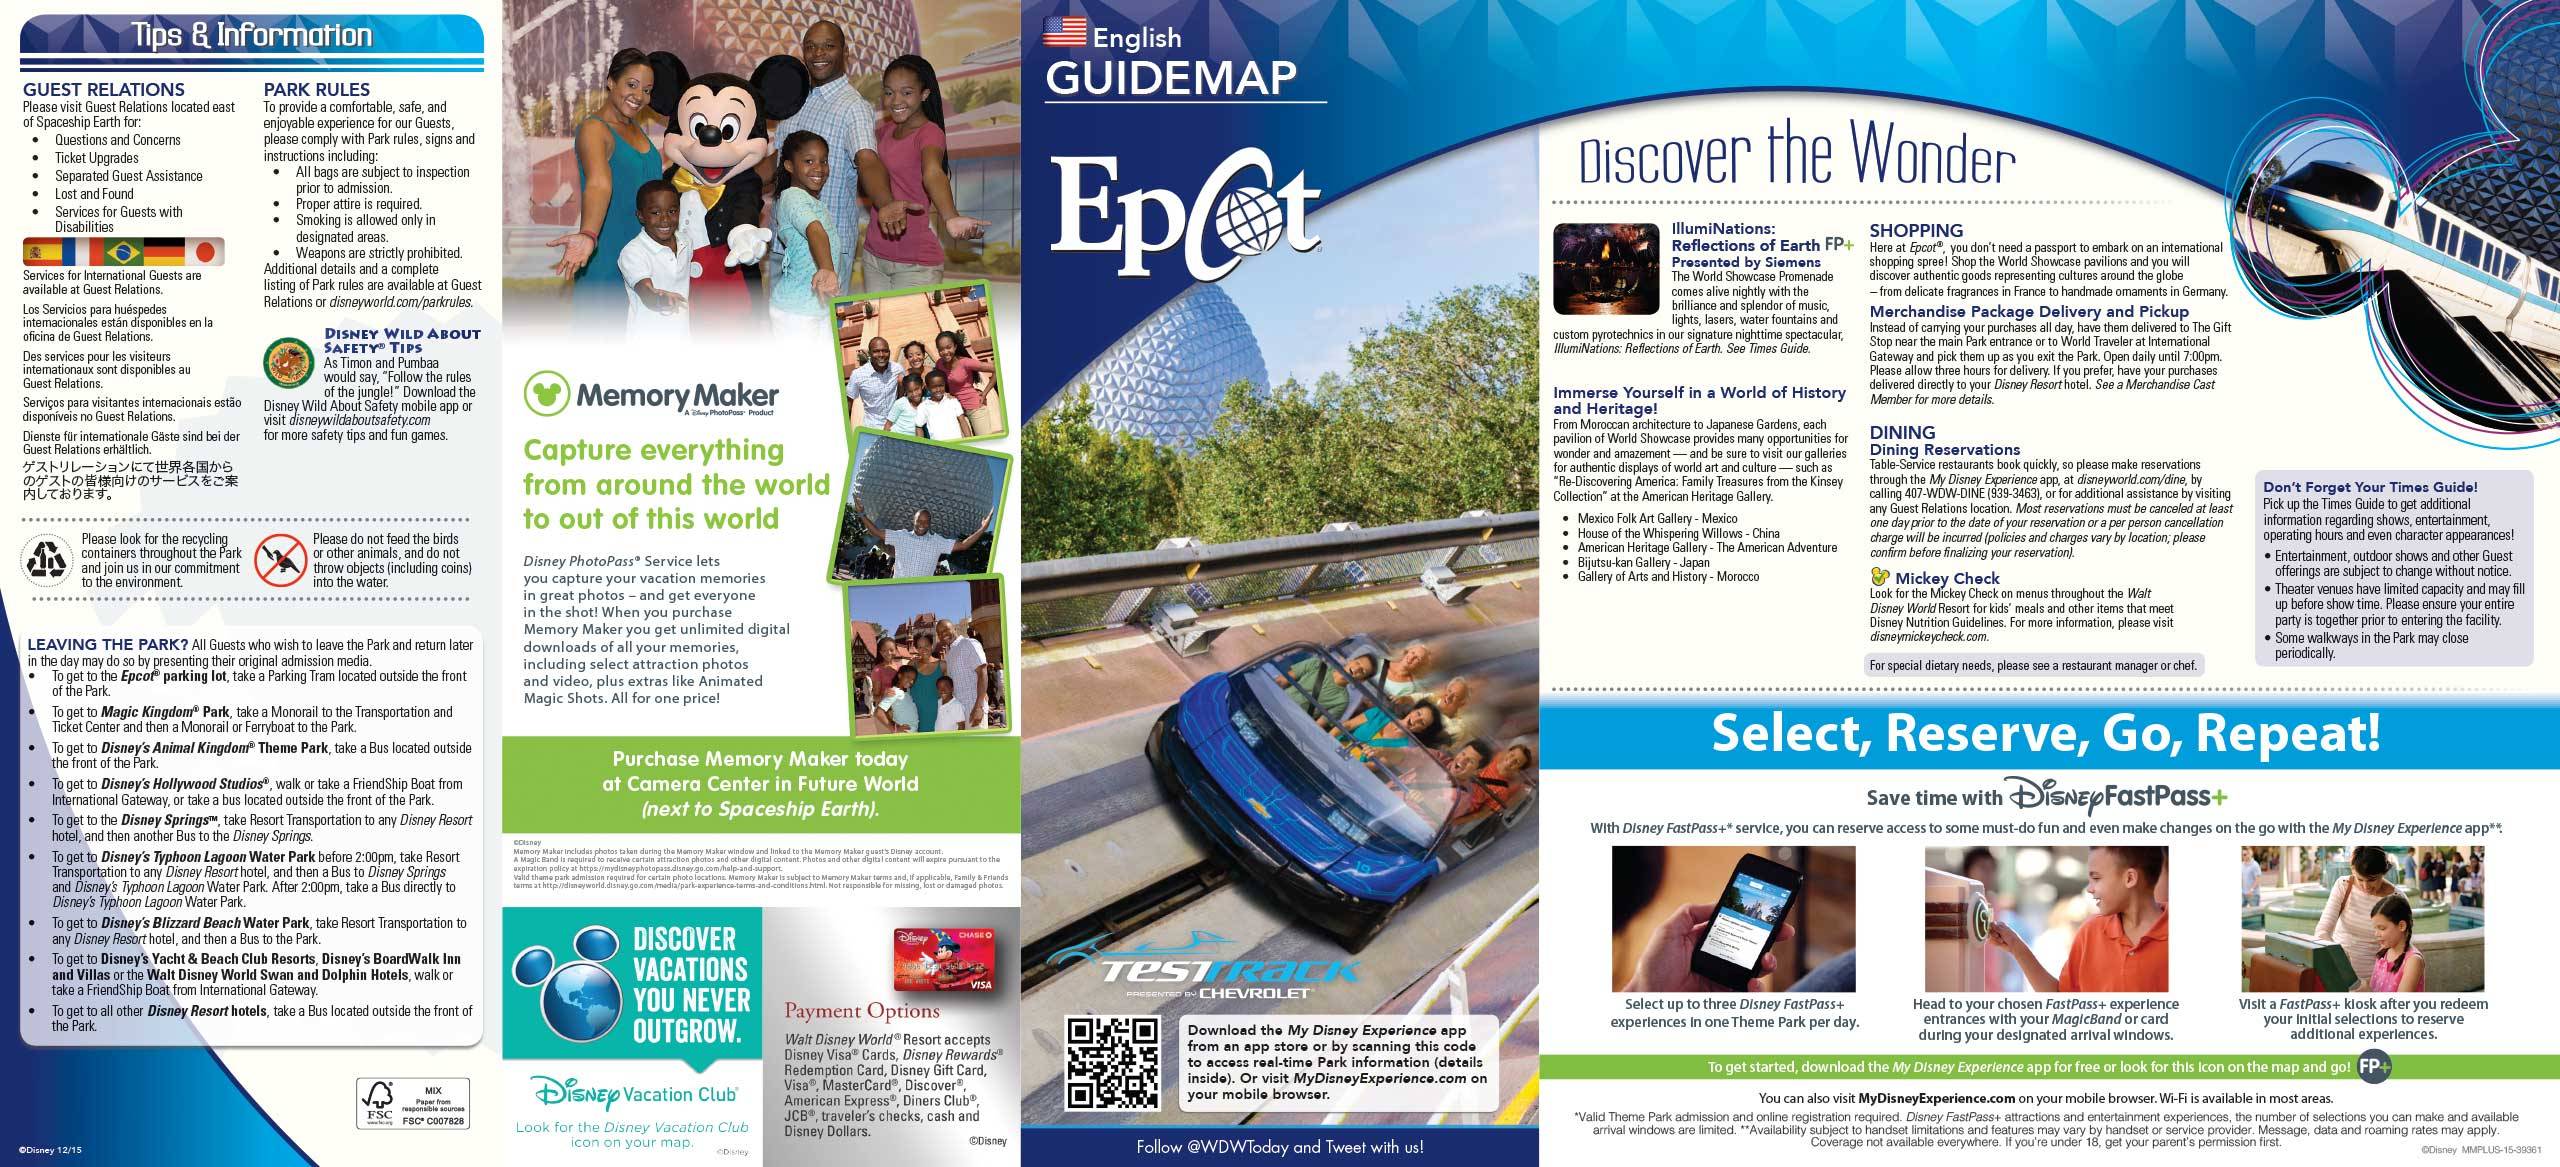 Epcot Guide Map January 2016 - Front